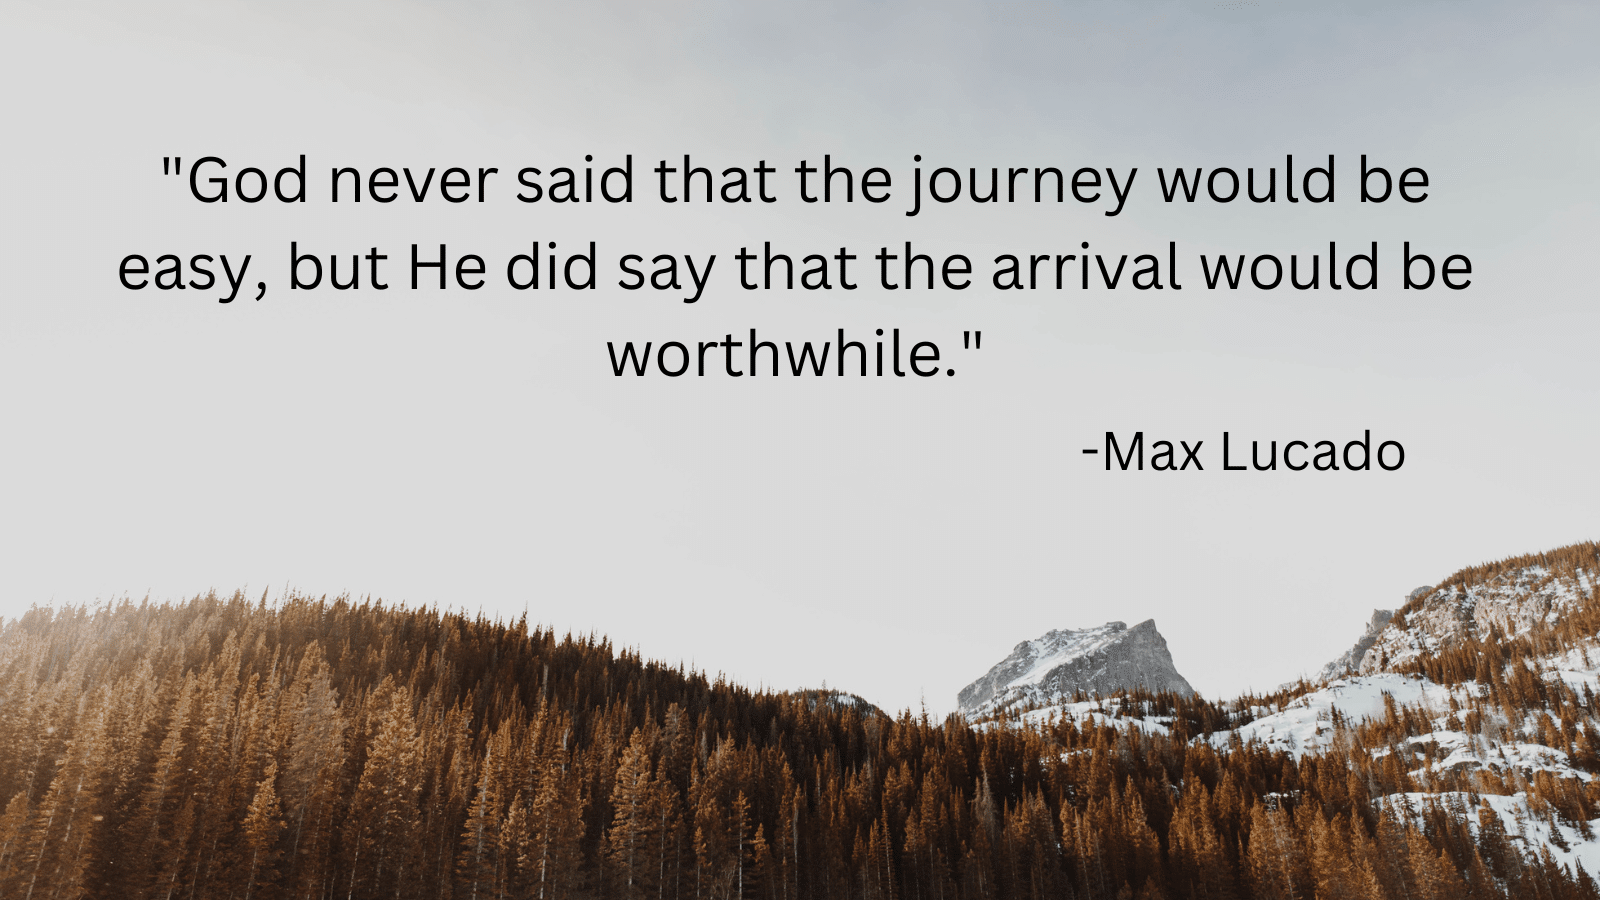 Forrest near a mountain range with Max Lucado quote